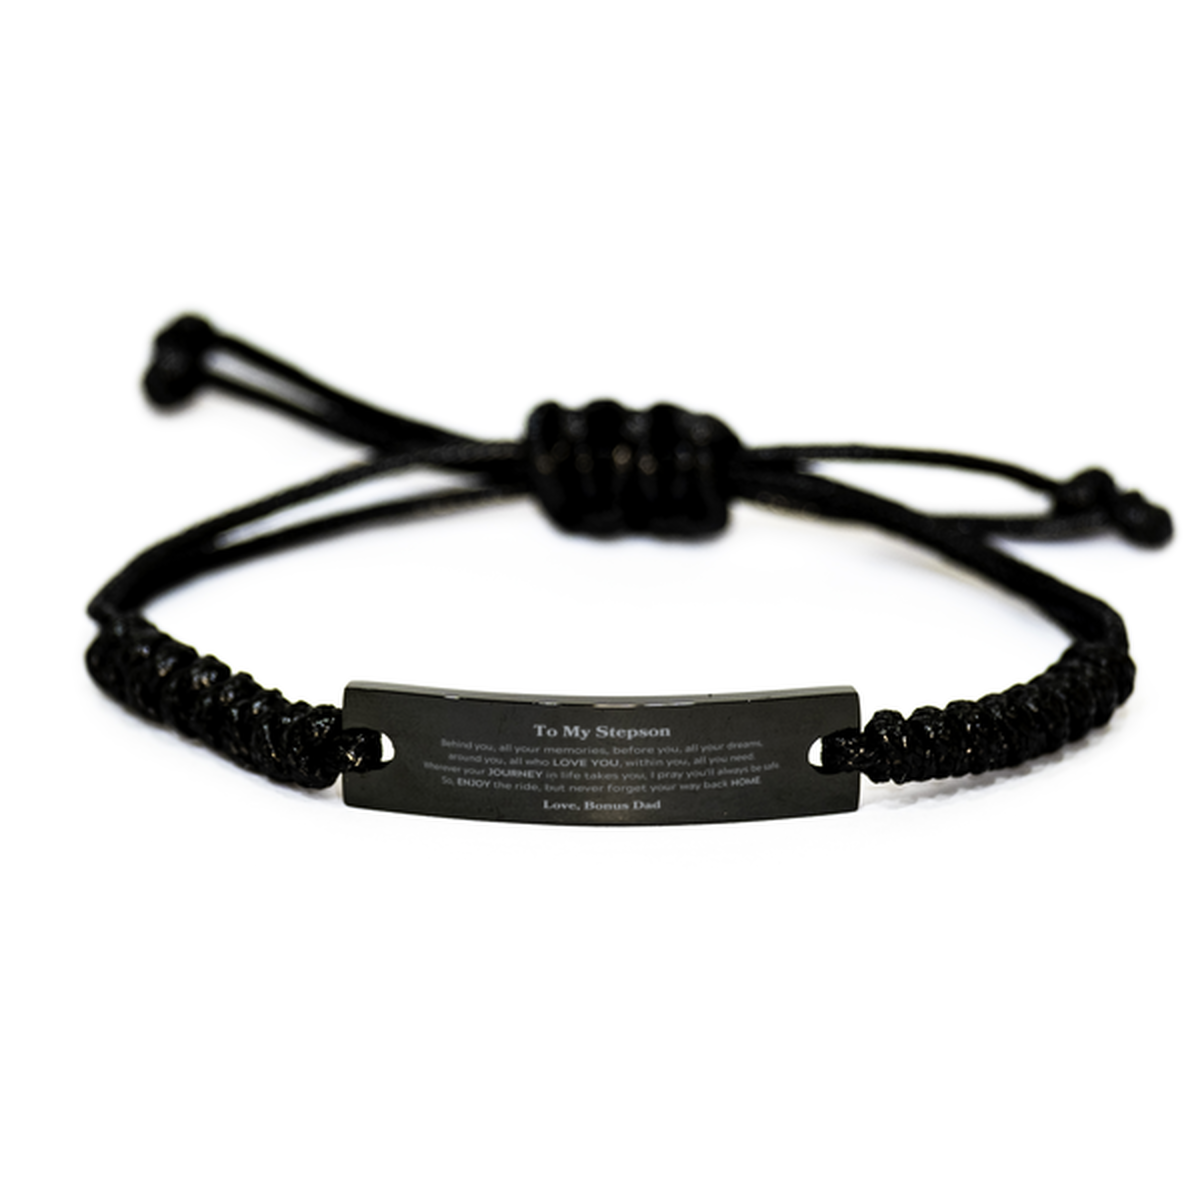 To My Stepson Graduation Gifts from Bonus Dad, Stepson Black Rope Bracelet Christmas Birthday Gifts for Stepson Behind you, all your memories, before you, all your dreams. Love, Bonus Dad